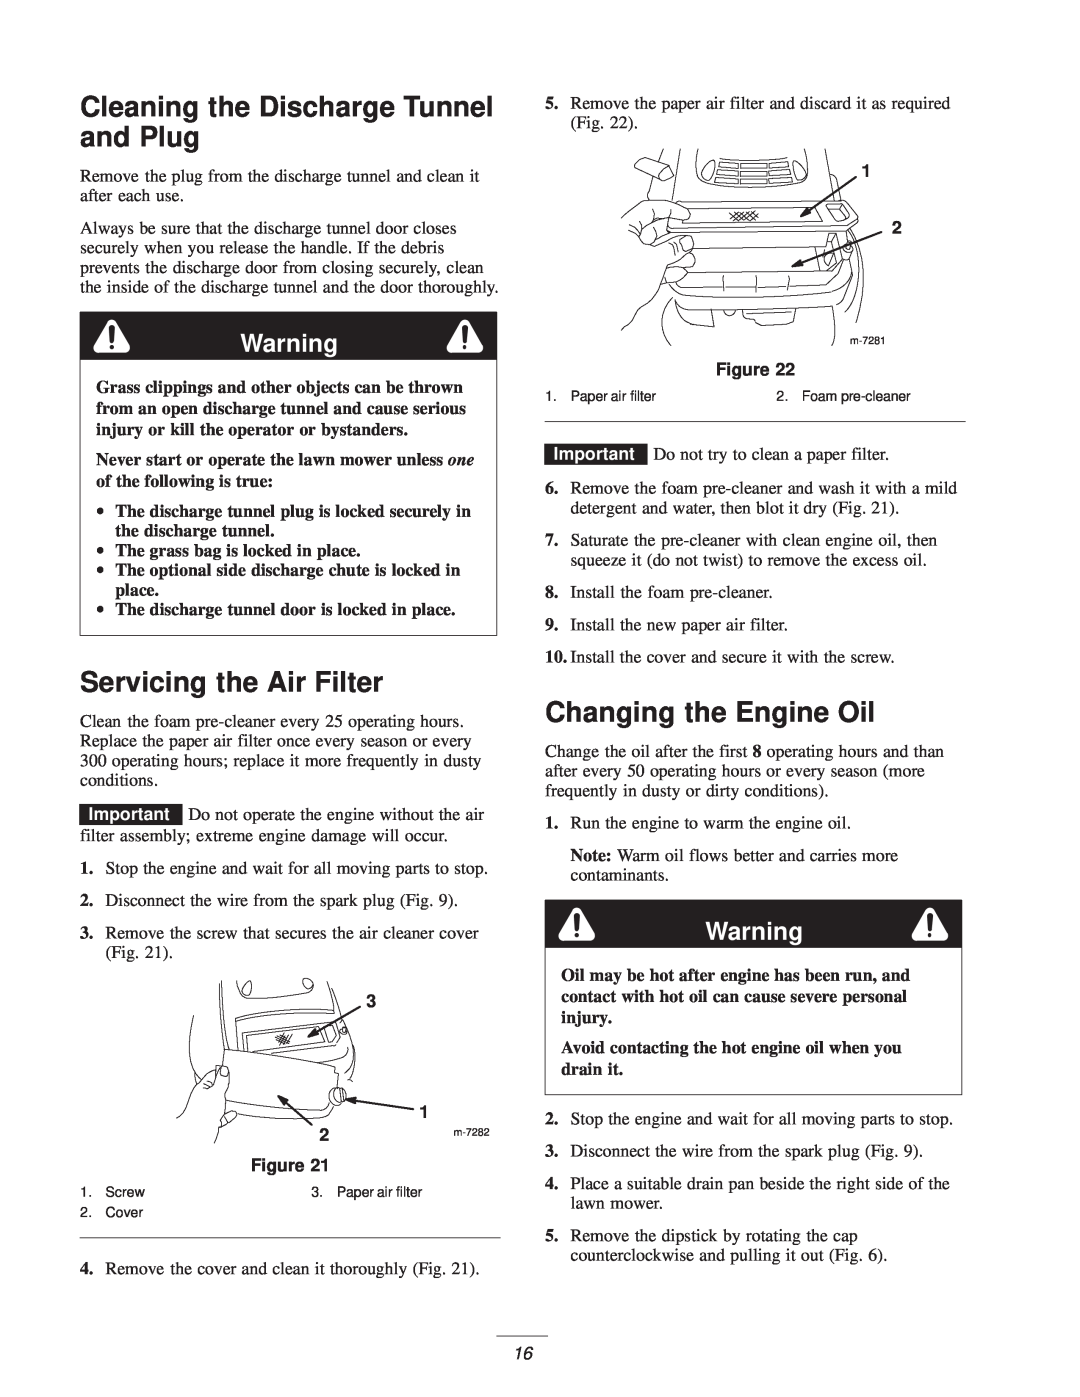 Exmark M216KASPC manual Cleaning the Discharge Tunnel and Plug, Servicing the Air Filter, Changing the Engine Oil 